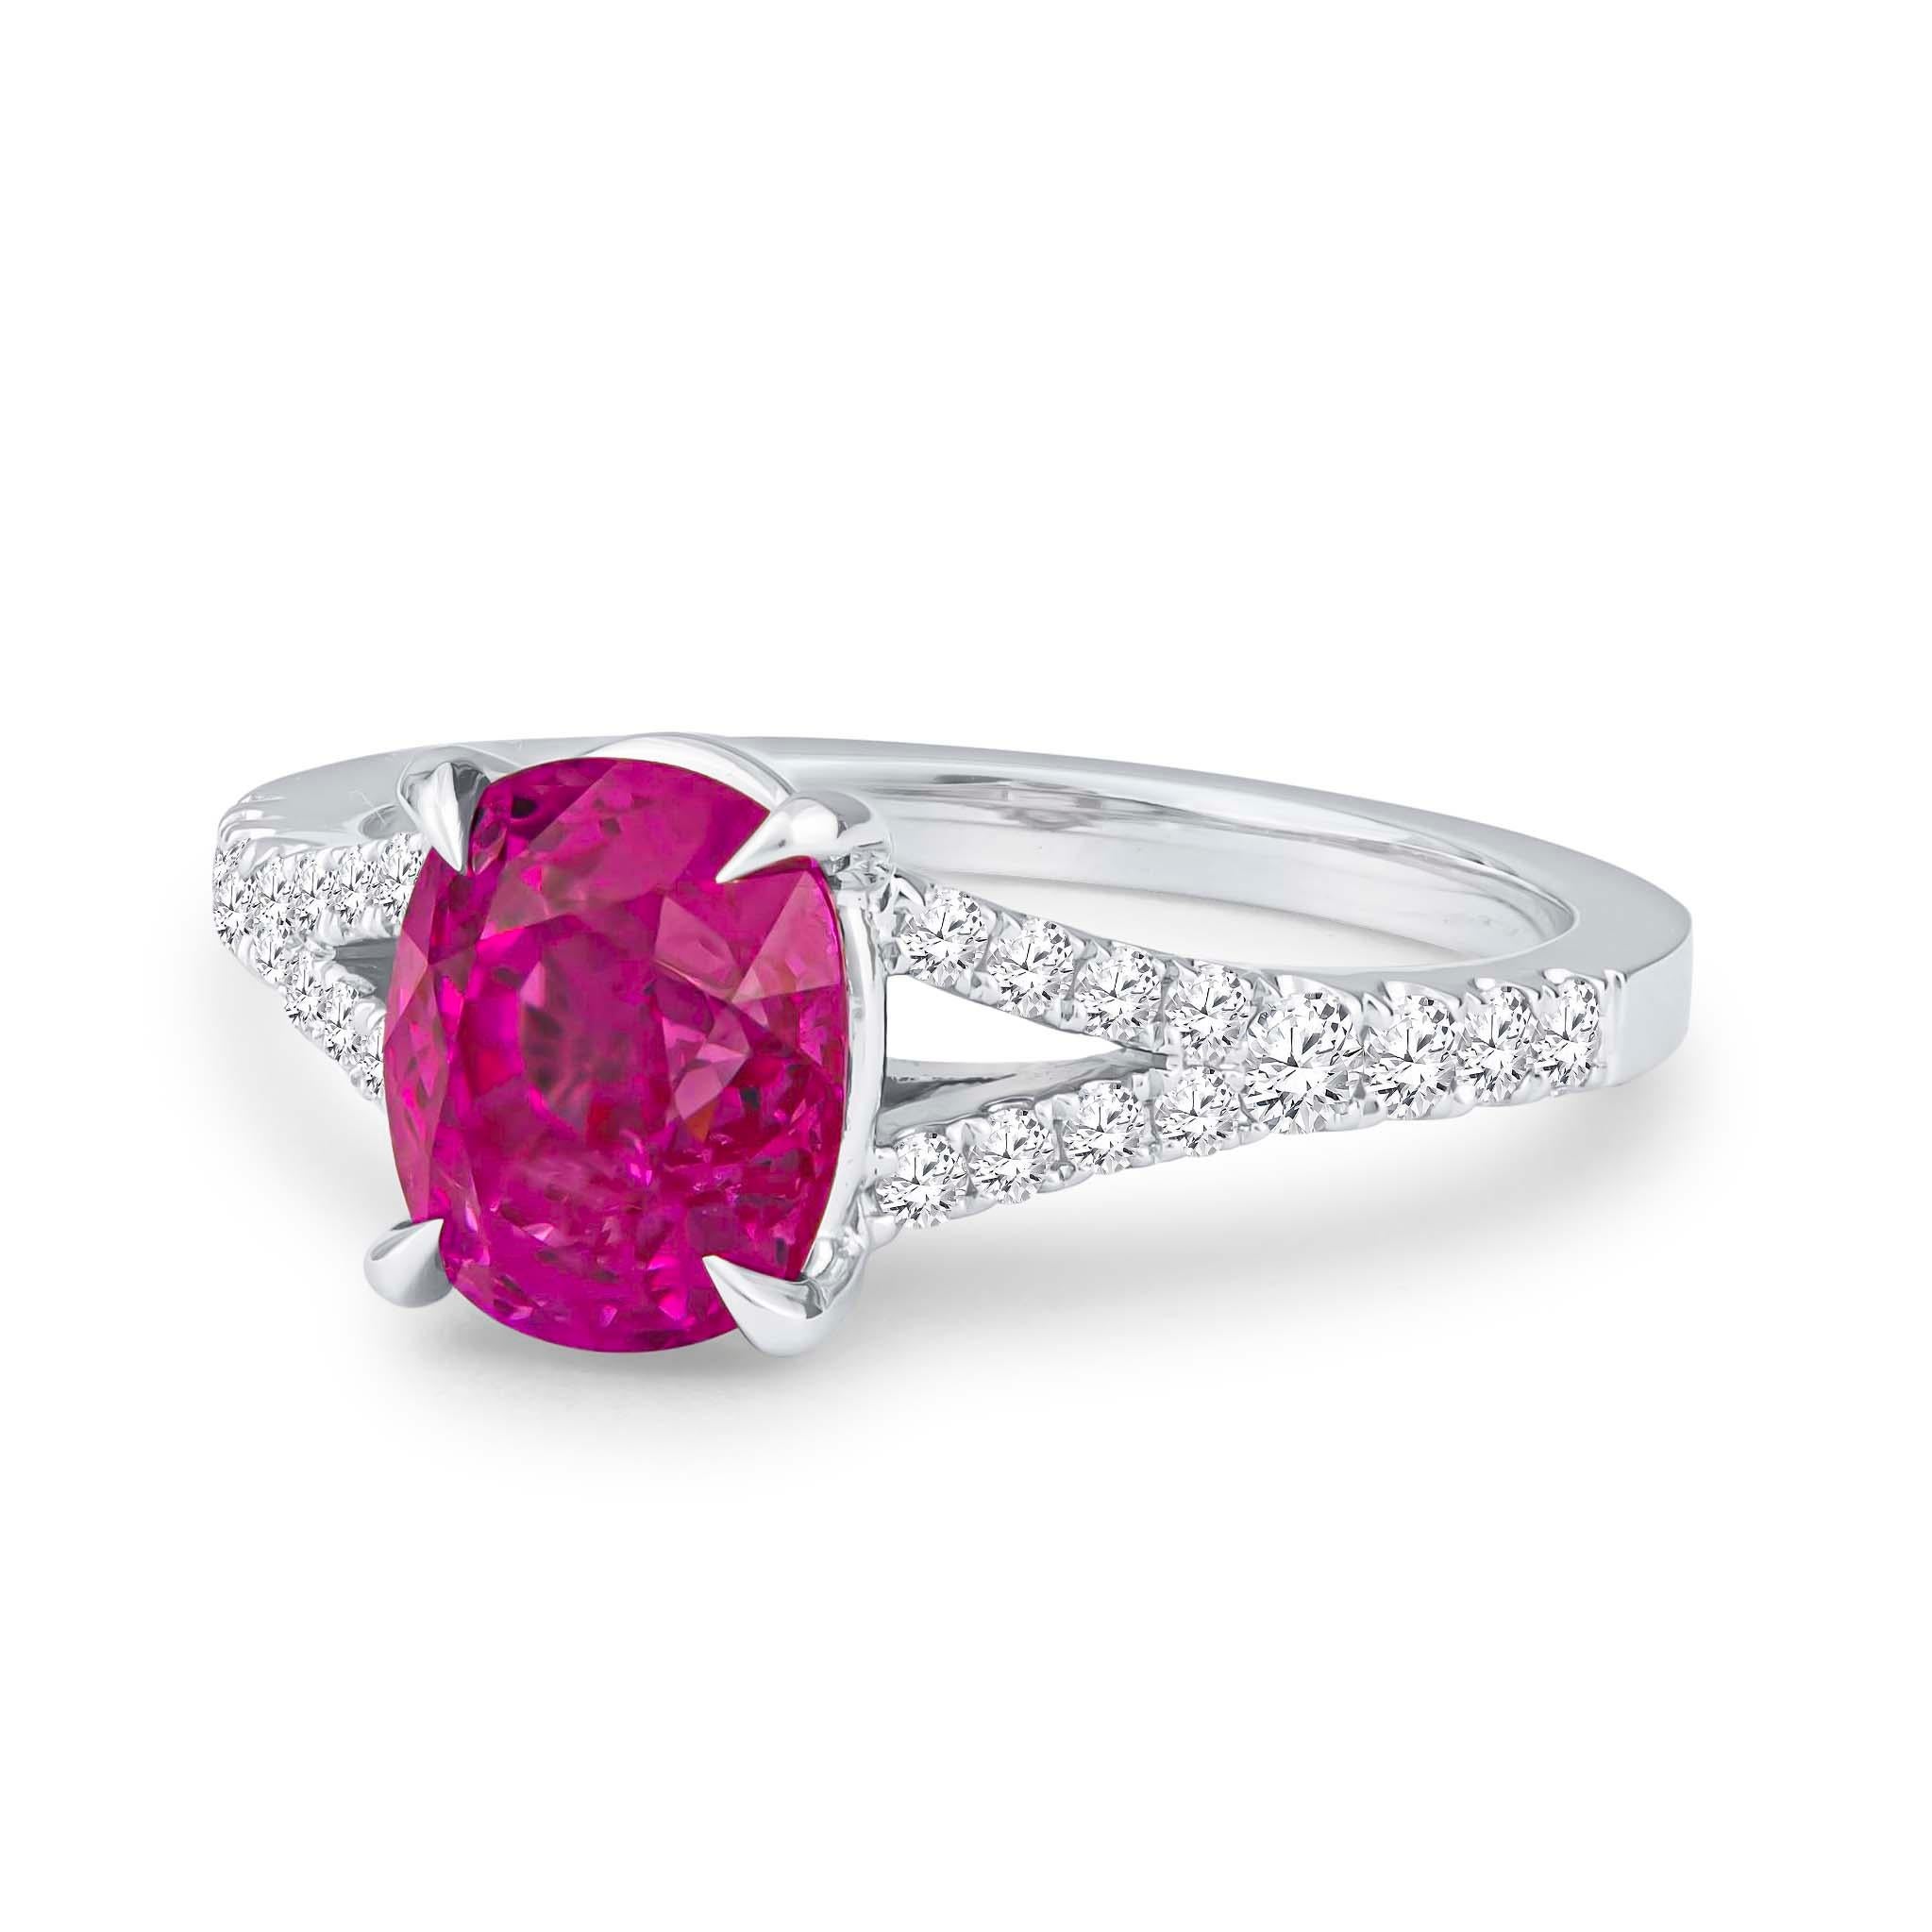 Gorgeous 18K white gold split shank diamond engagement ring showcasing one GIA certified 2.77 carat cushion cut natural purple-pink Burma sapphire. The center stone is adorned by 0.36 carats of fine round brilliant cut diamonds that have been